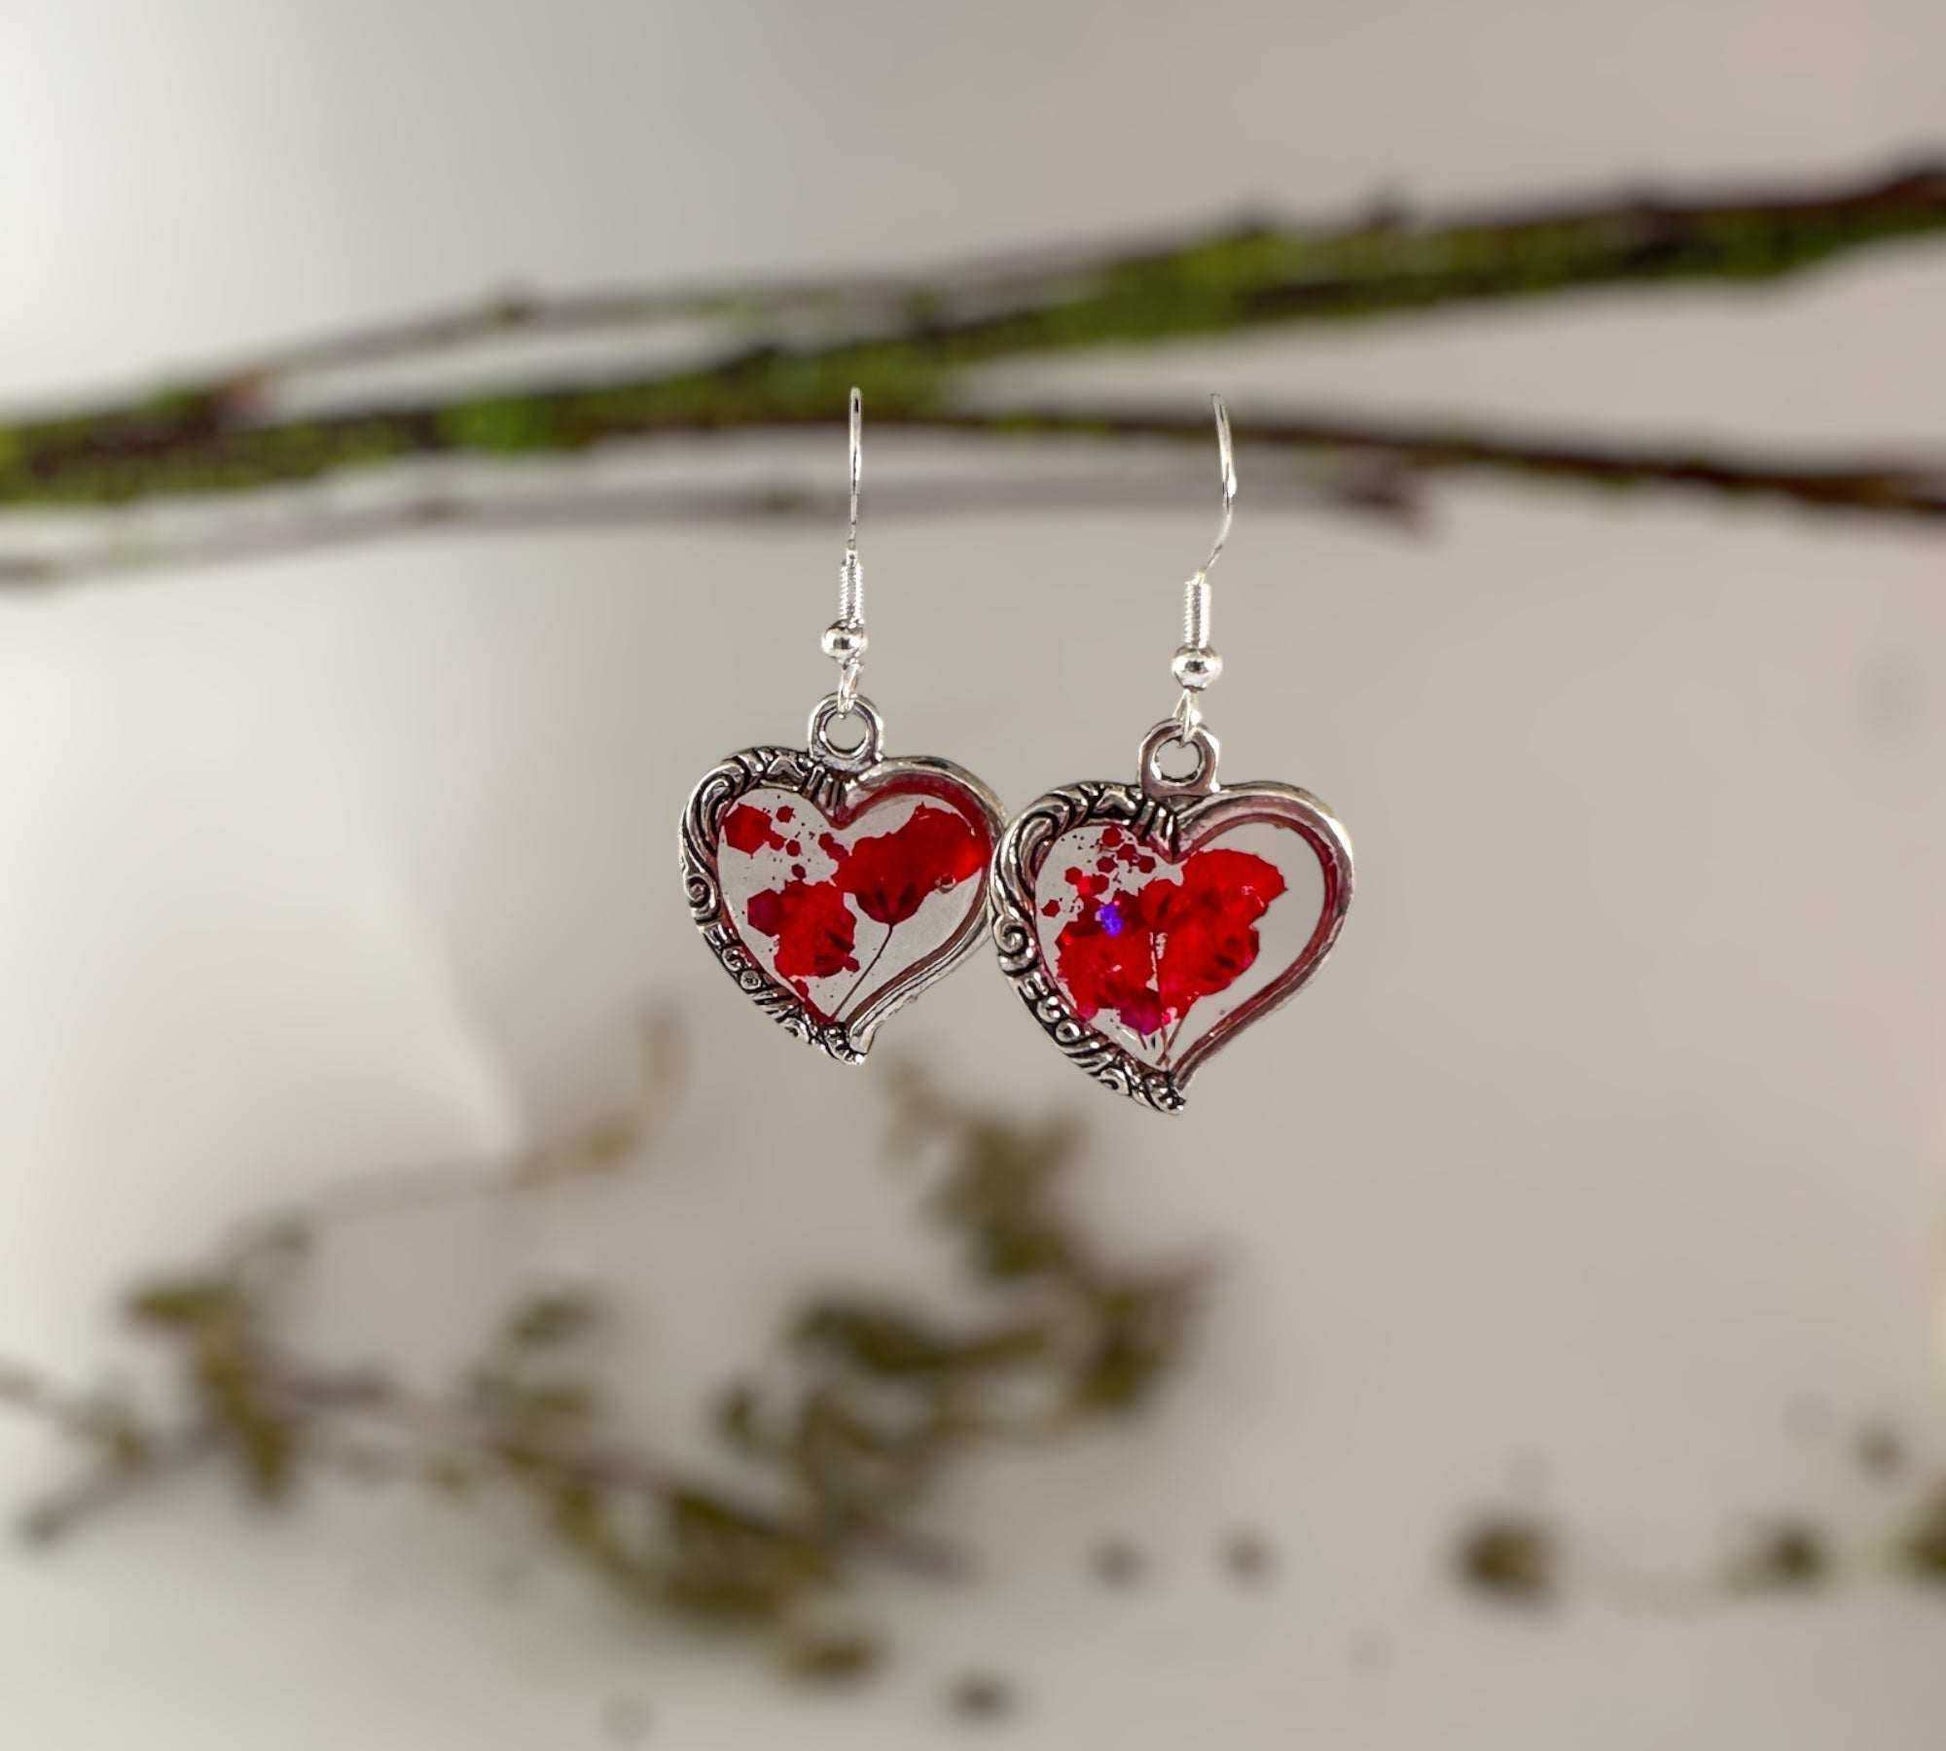 Heart Shaped Rose Red Floral Earring Set - Handmade with Dried Flowersped Rose Red Floral Earring Set - Handmade with Dried Flowers